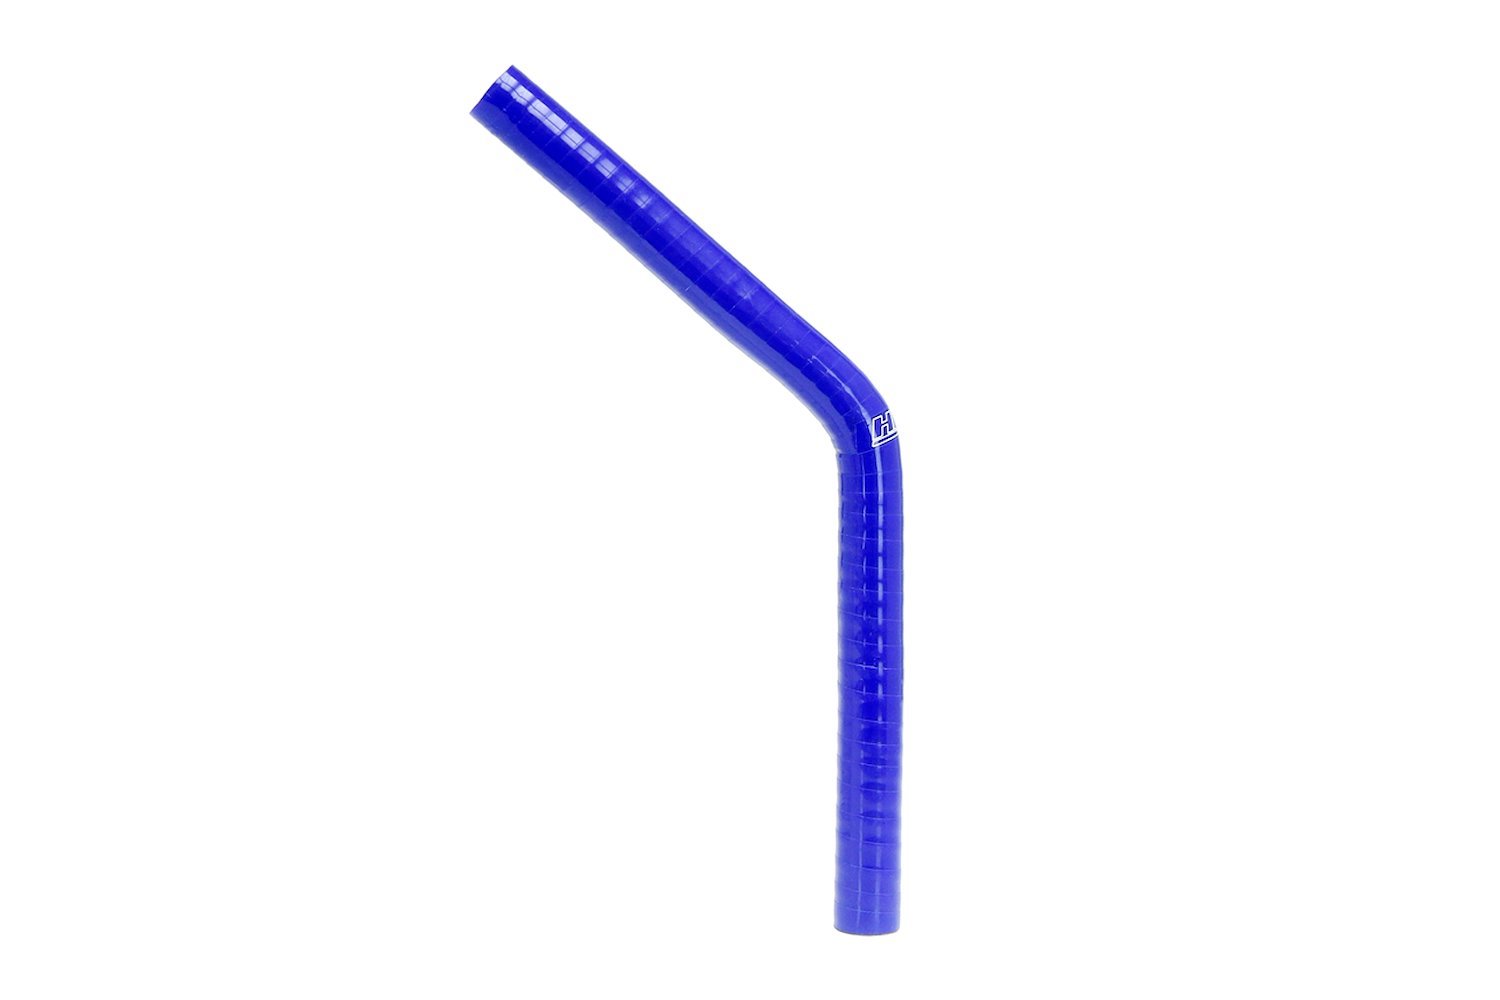 HTSEC45-075-BLUE Silicone 45-Degree Elbow Coupler Hose, High-Temp 4-Ply Reinforced, 3/4 in. ID, Blue